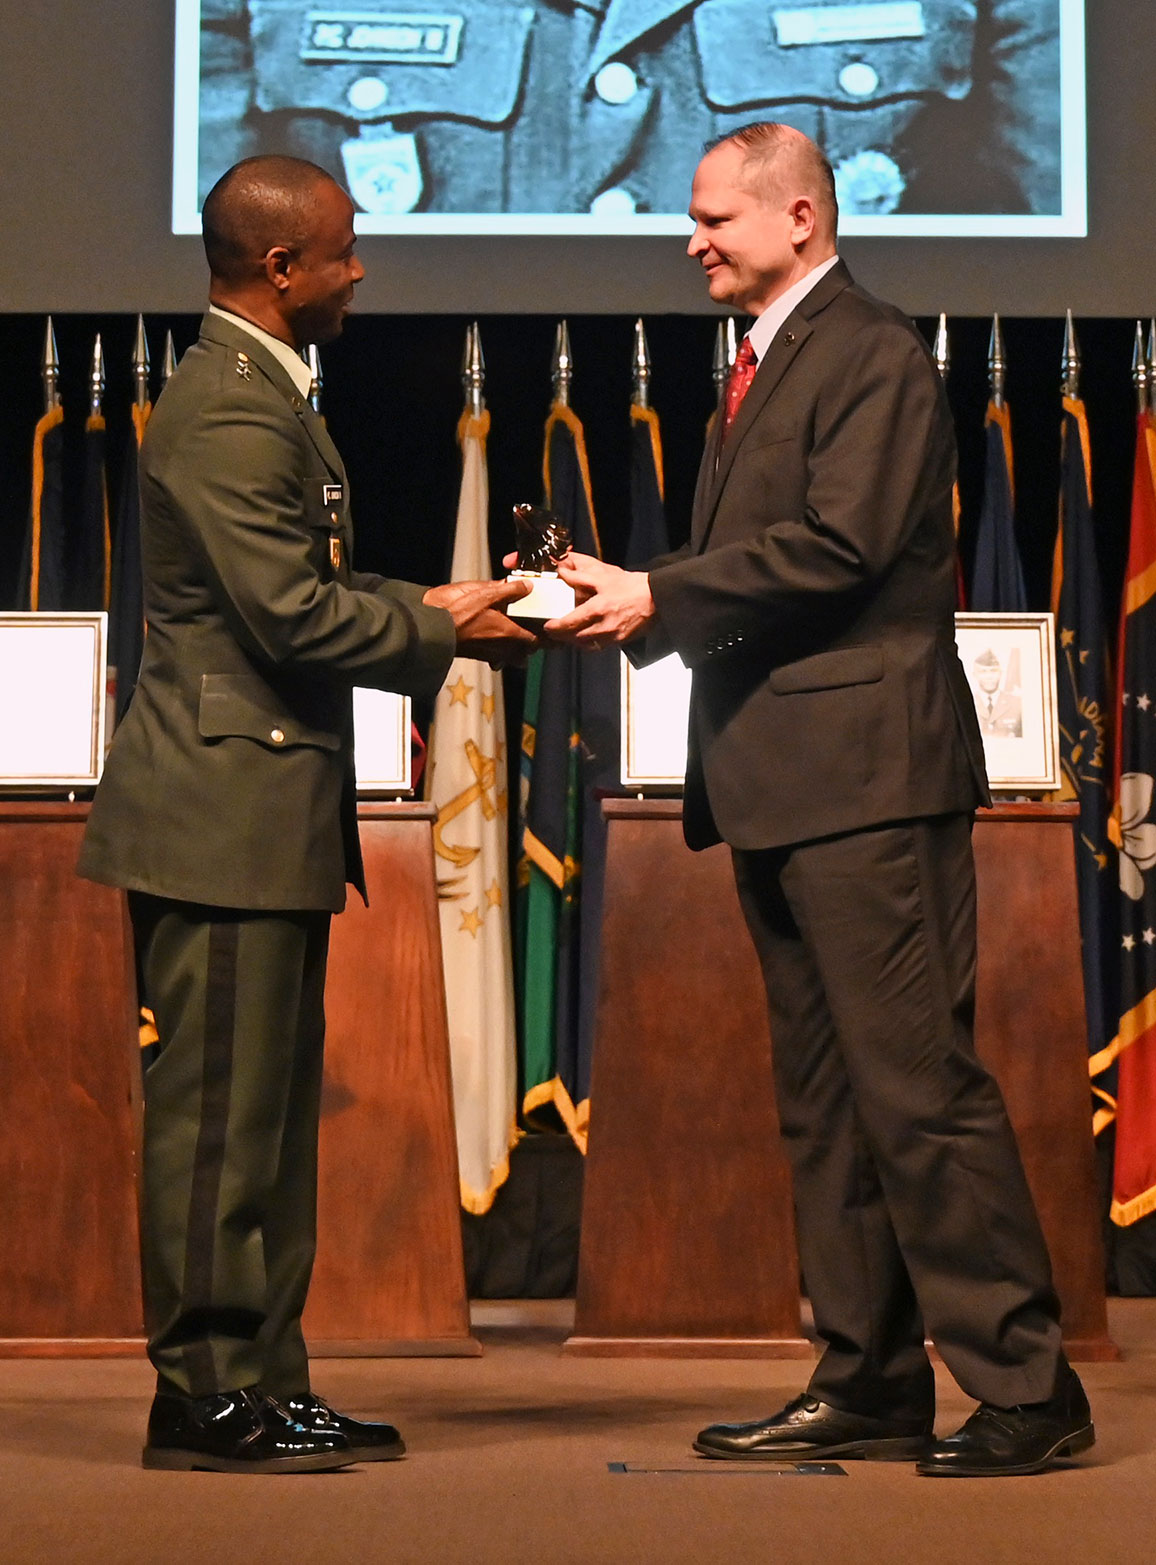 CGSC Foundation Chairman Brig. Gen. (Ret.) Bryan W. Wampler, right, presents Maj. Gen. Prince Charles Johnson, III, Chief of Staff, Armed Forces of Liberia, with an eagle statuette signifying his appointment as a life constituent of the CGSC Foundation during the International Hall of Fame induction ceremony April 12, 2022, at the Lewis and Clark Center, Fort Leavenworth, Kansas.